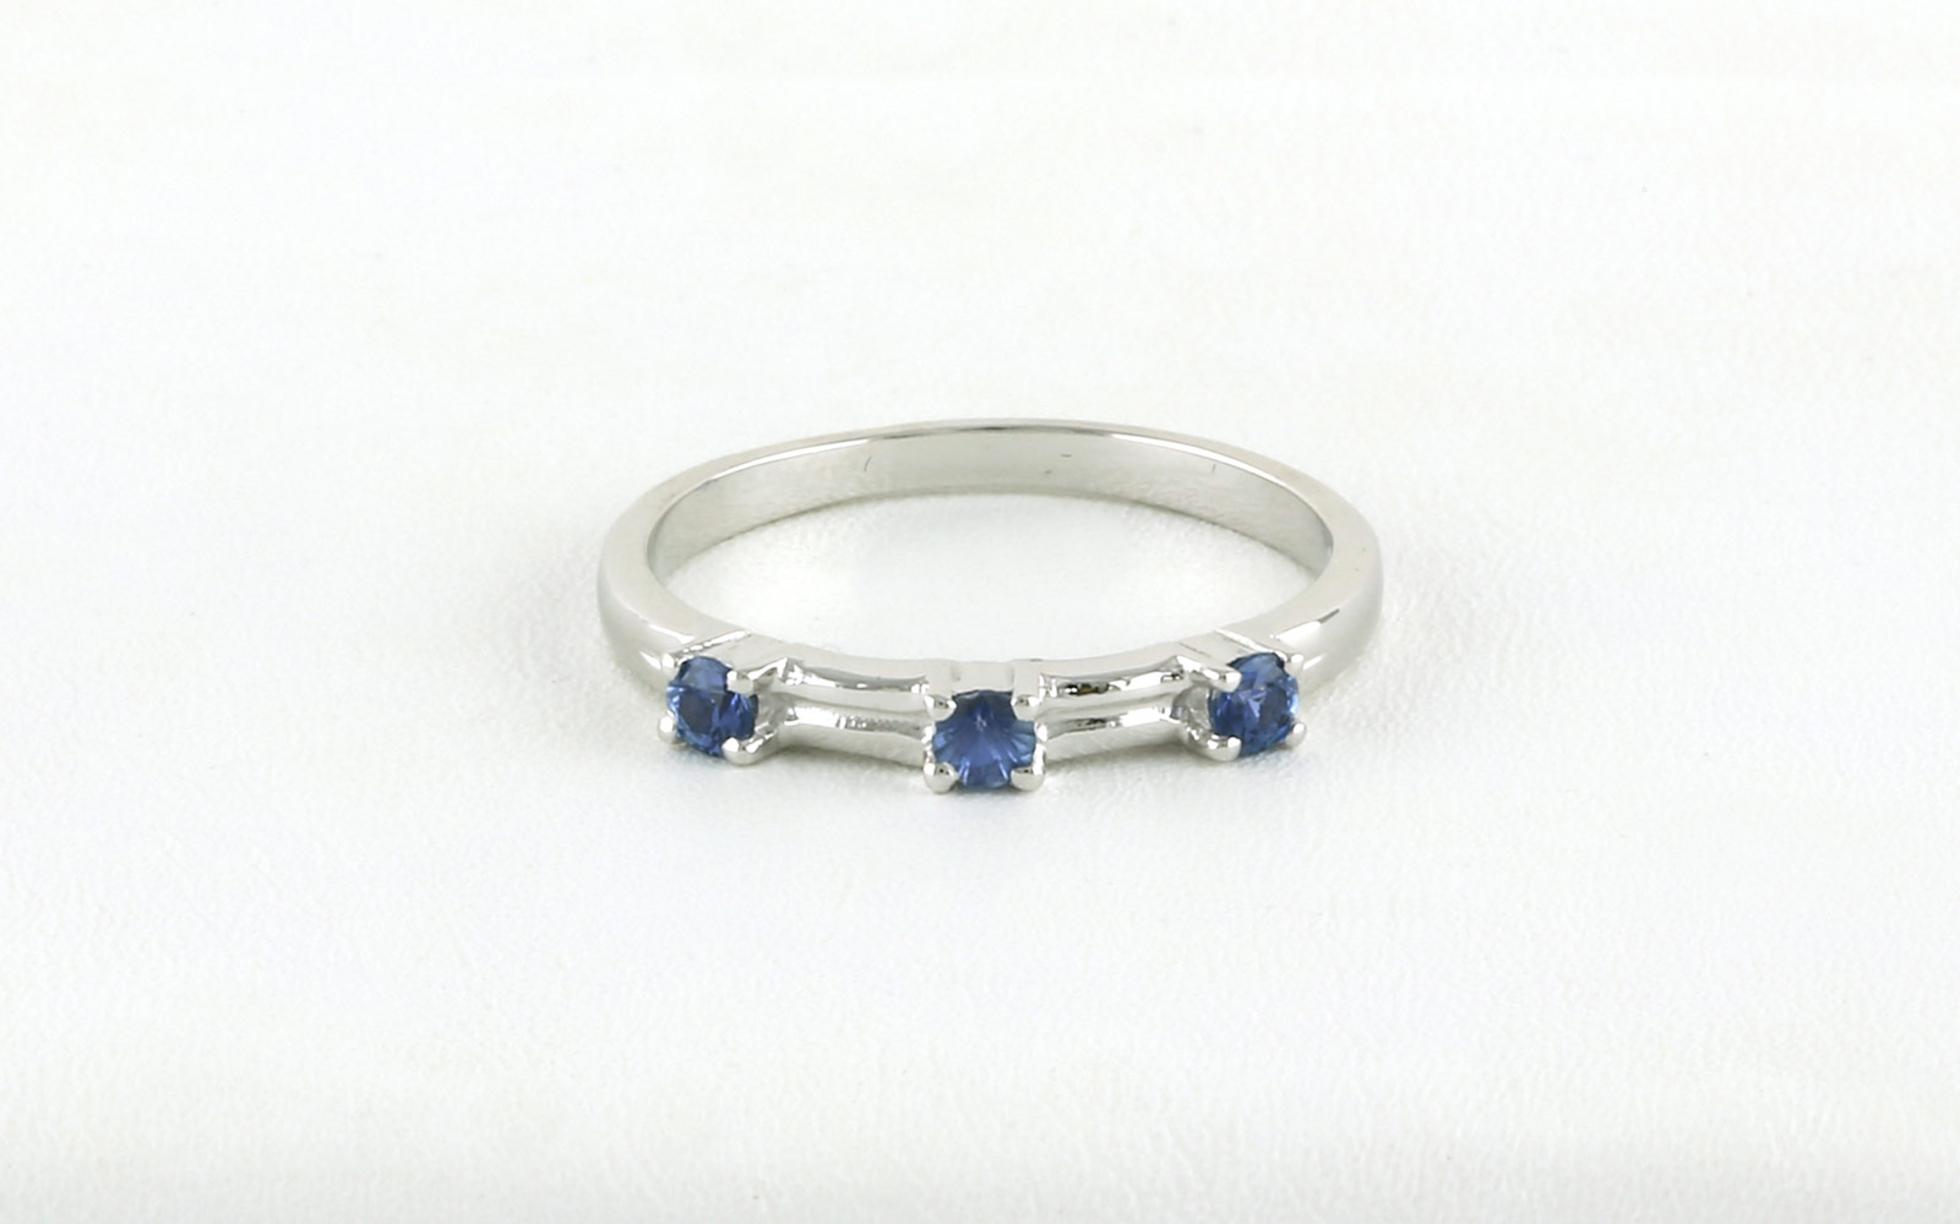 3-Stone Spaced Montana Yogo Sapphire Ring with Engraving Details in Sterling Silver (0.23cts TWT)